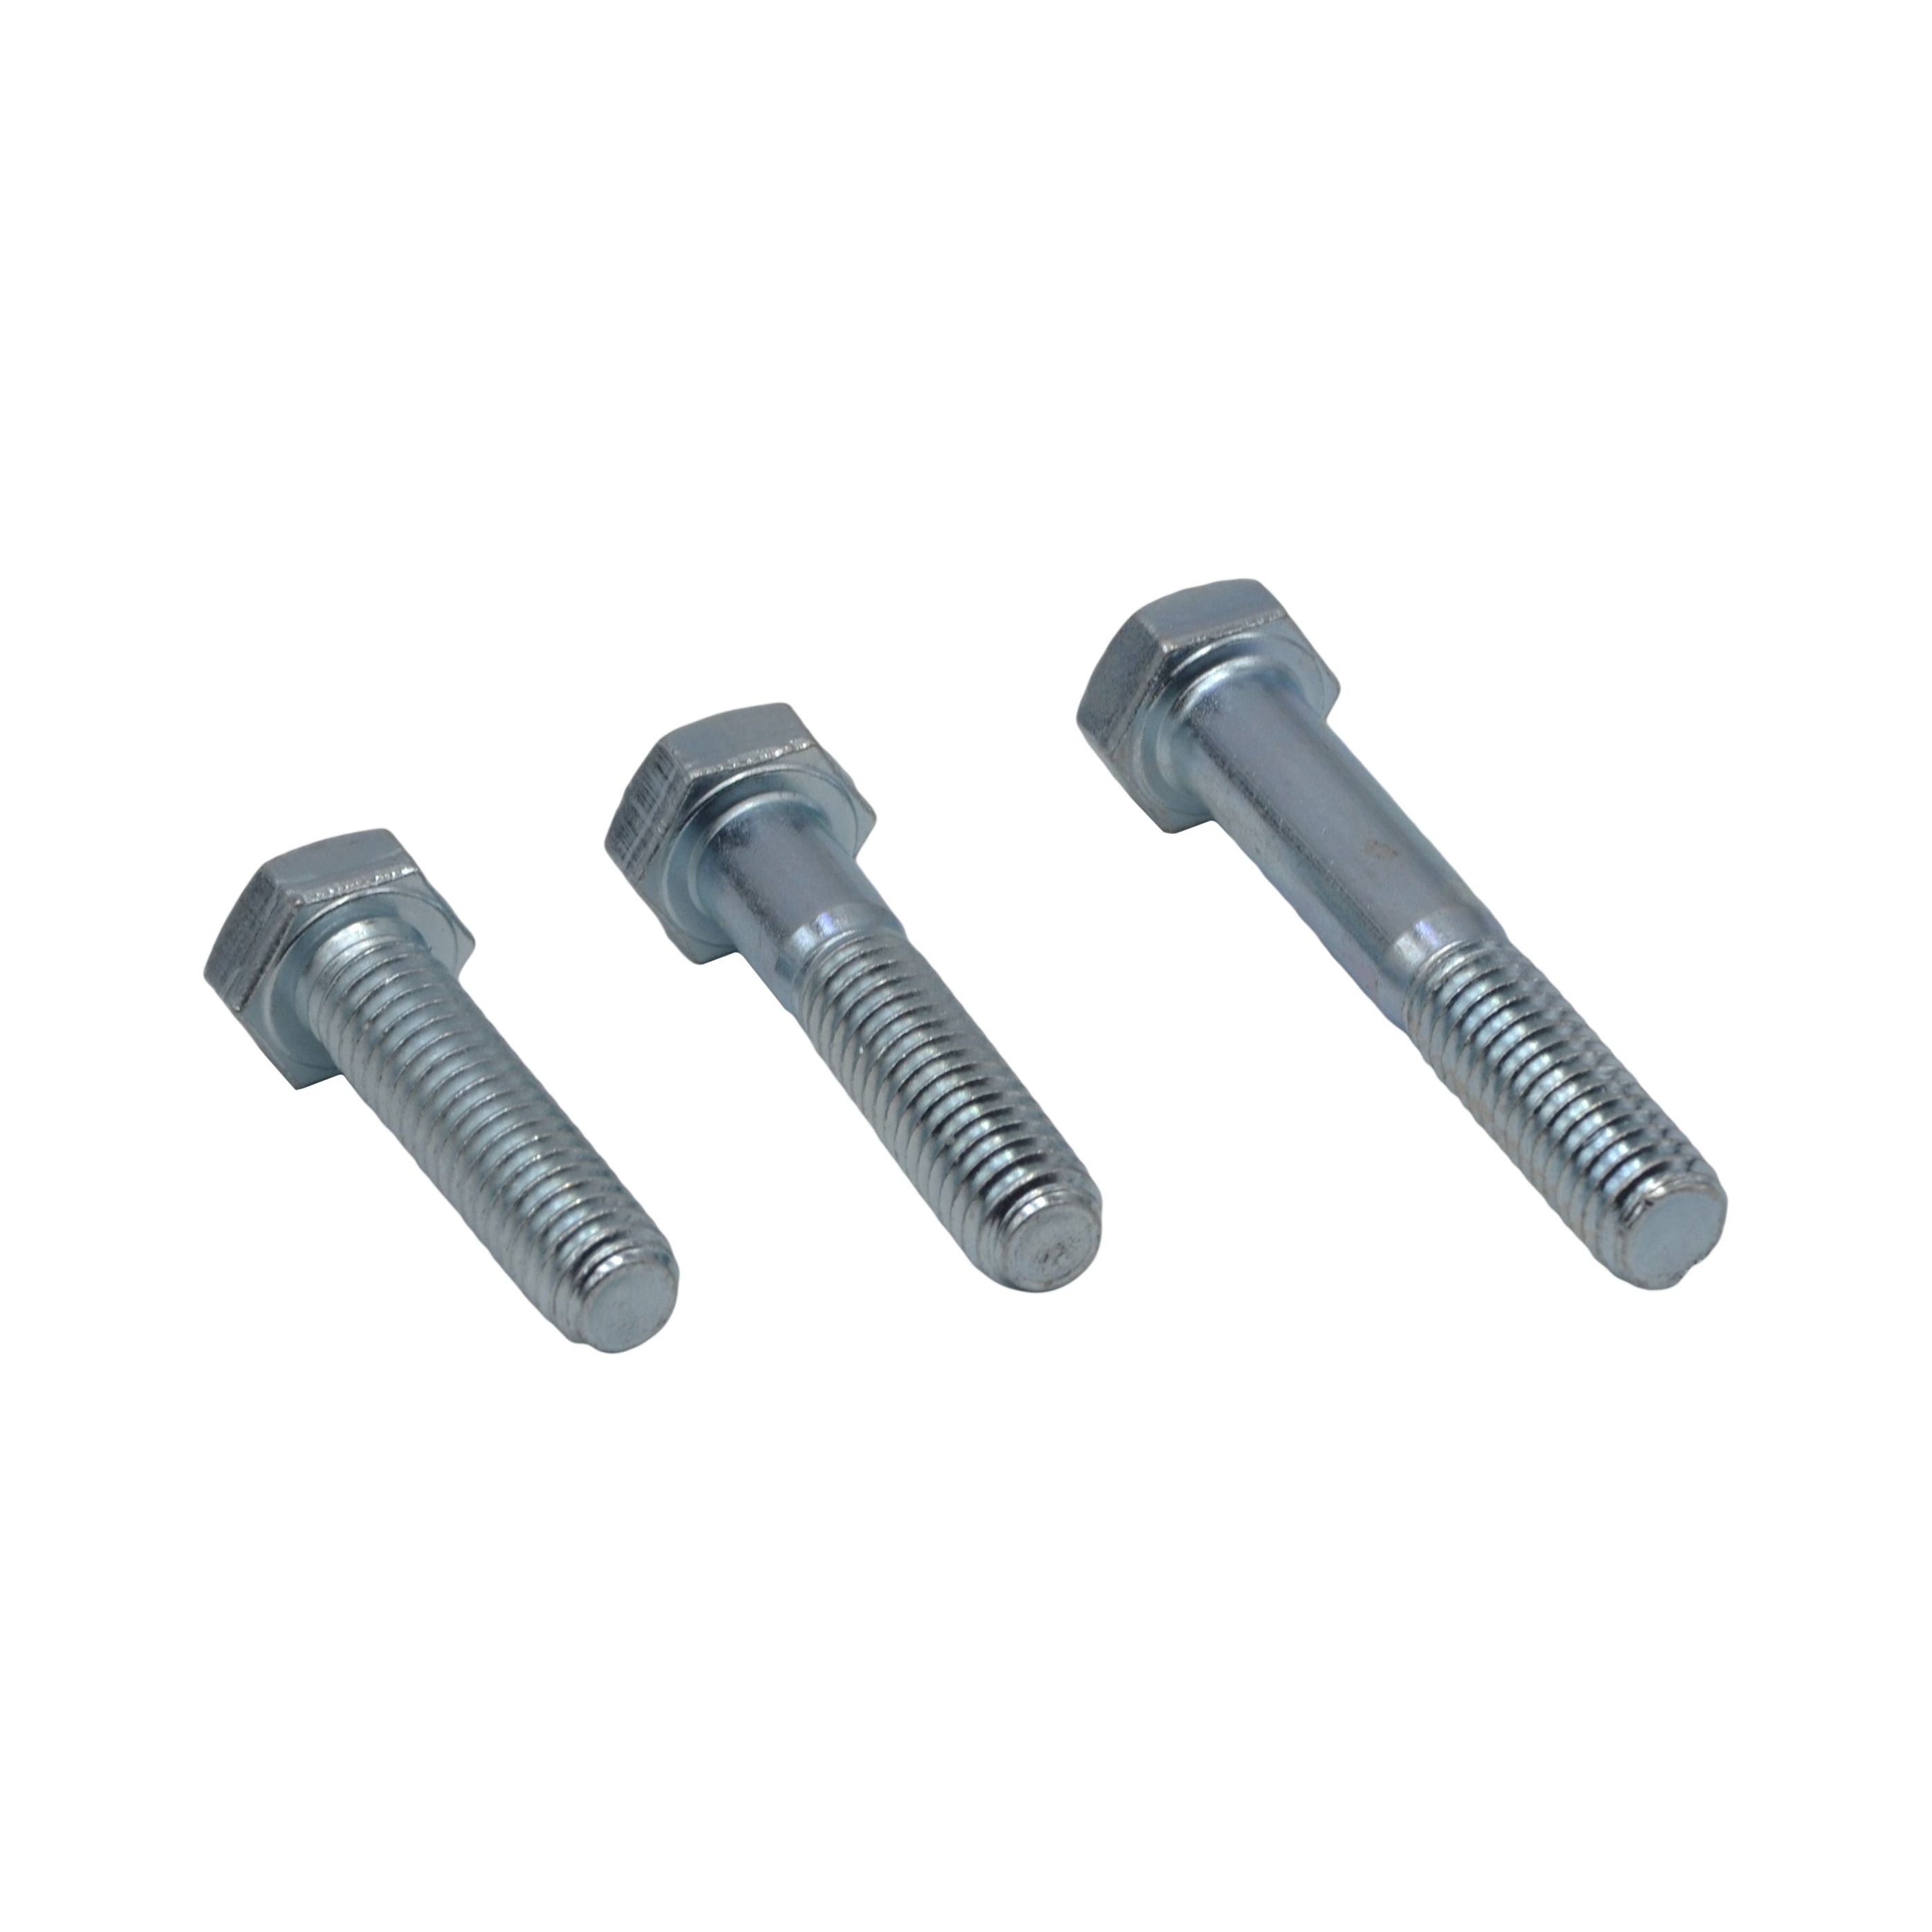 456 pc High Tensile Imperial Nut and Bolt Grab Kit